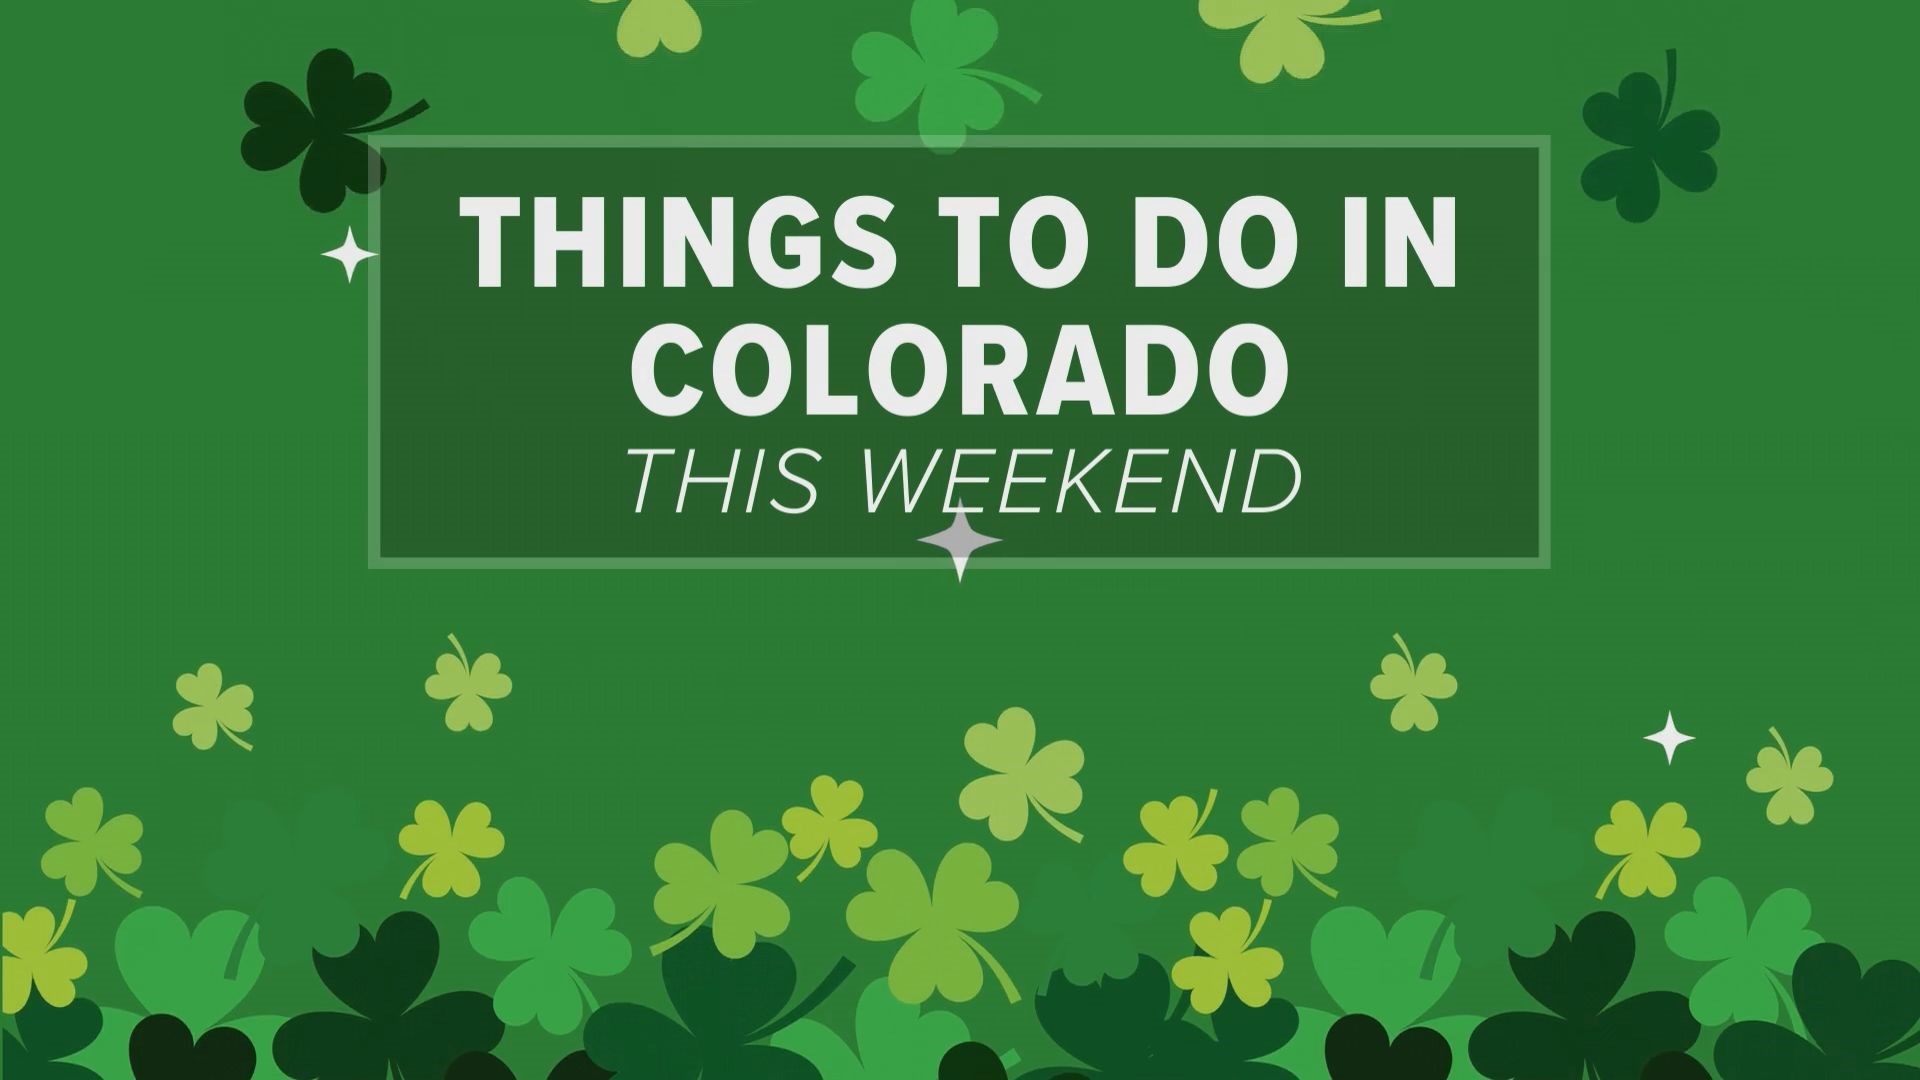 Colorado will go green this weekend with St. Patrick's Day celebrations planned across the Centennial State.